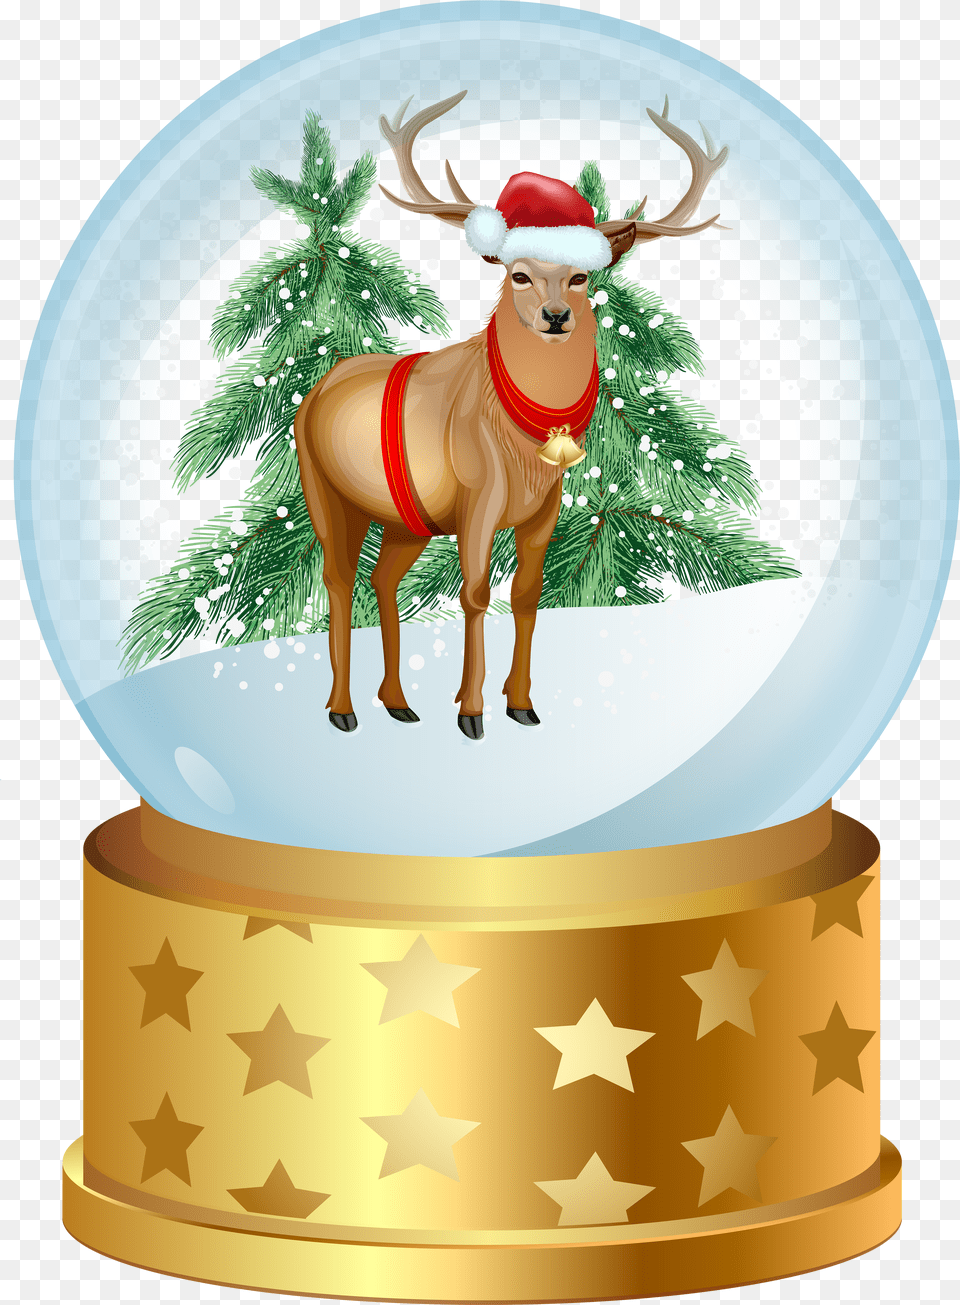 Christmas Globe Clip Art Image Gallery Christmas Snow Globes Clip Art Free Png Download